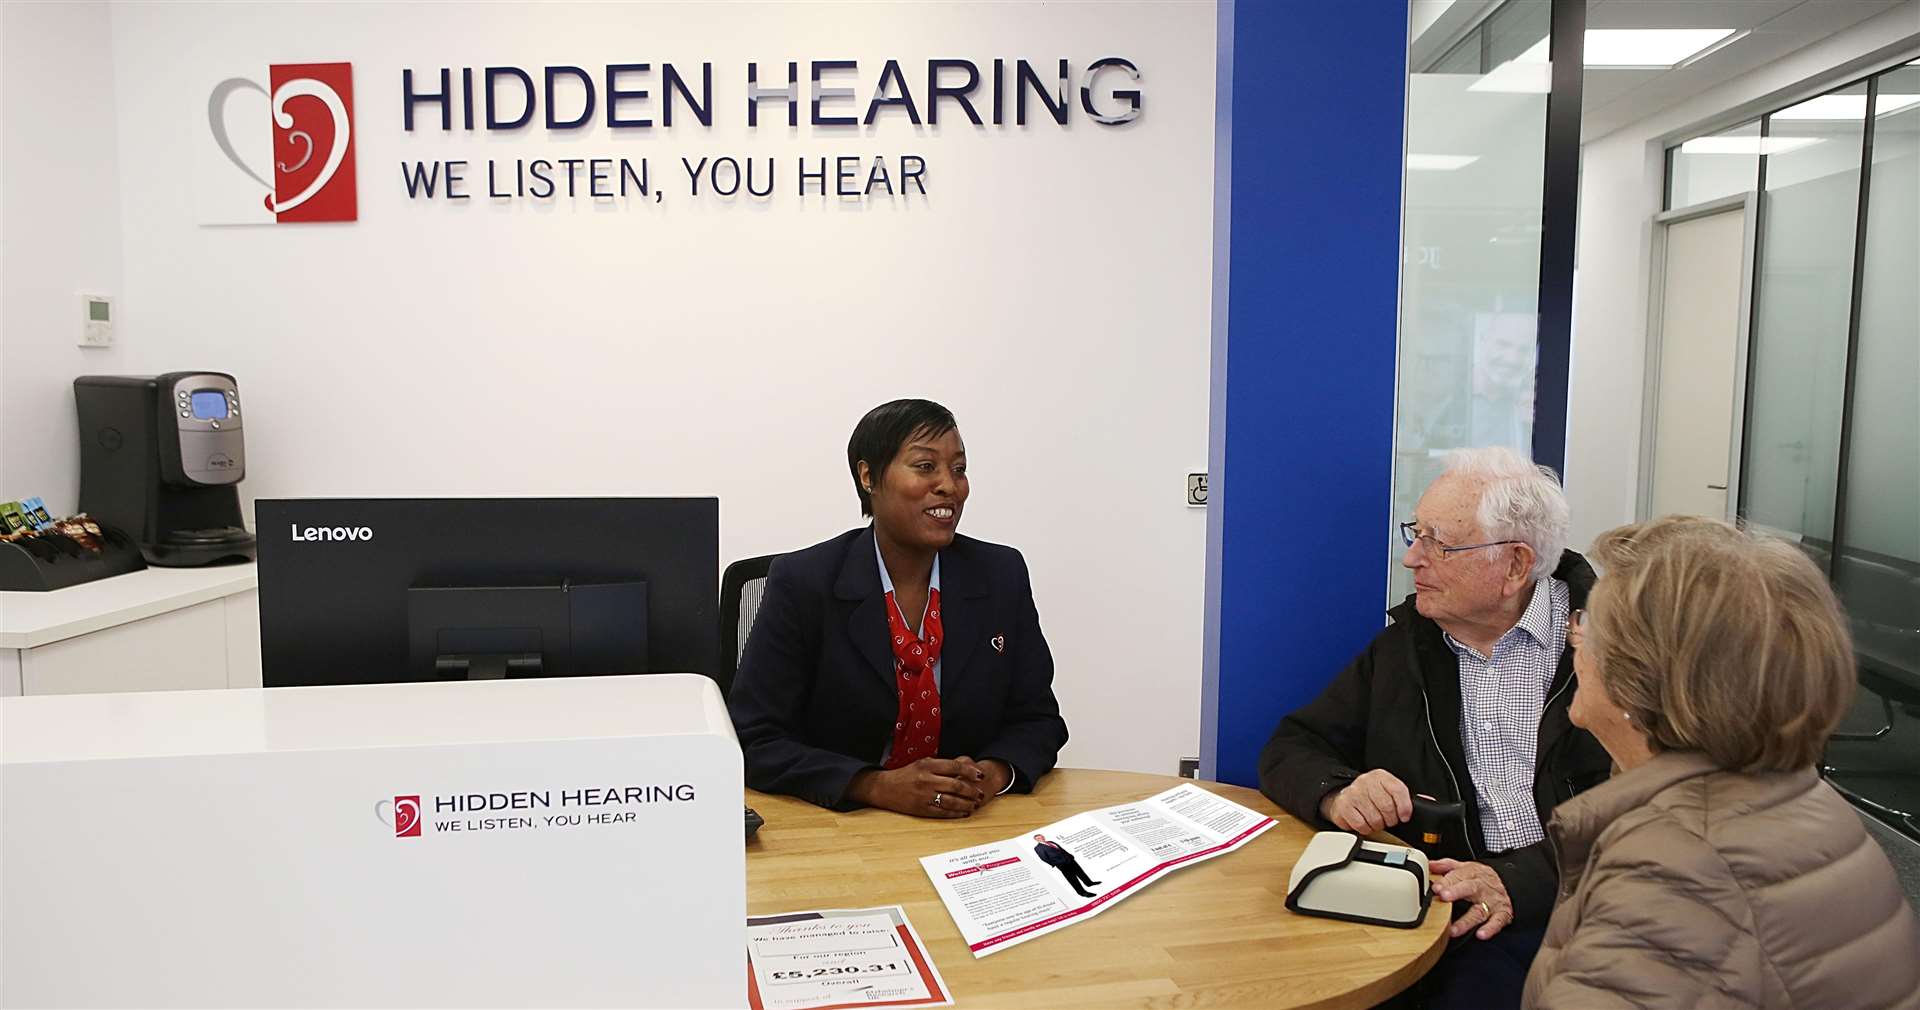 The Campaign for Better Hearing is an initiative which is part of Hidden Hearing’s commitment to helping everyone in the UK hear their best and live a happy, healthy life.